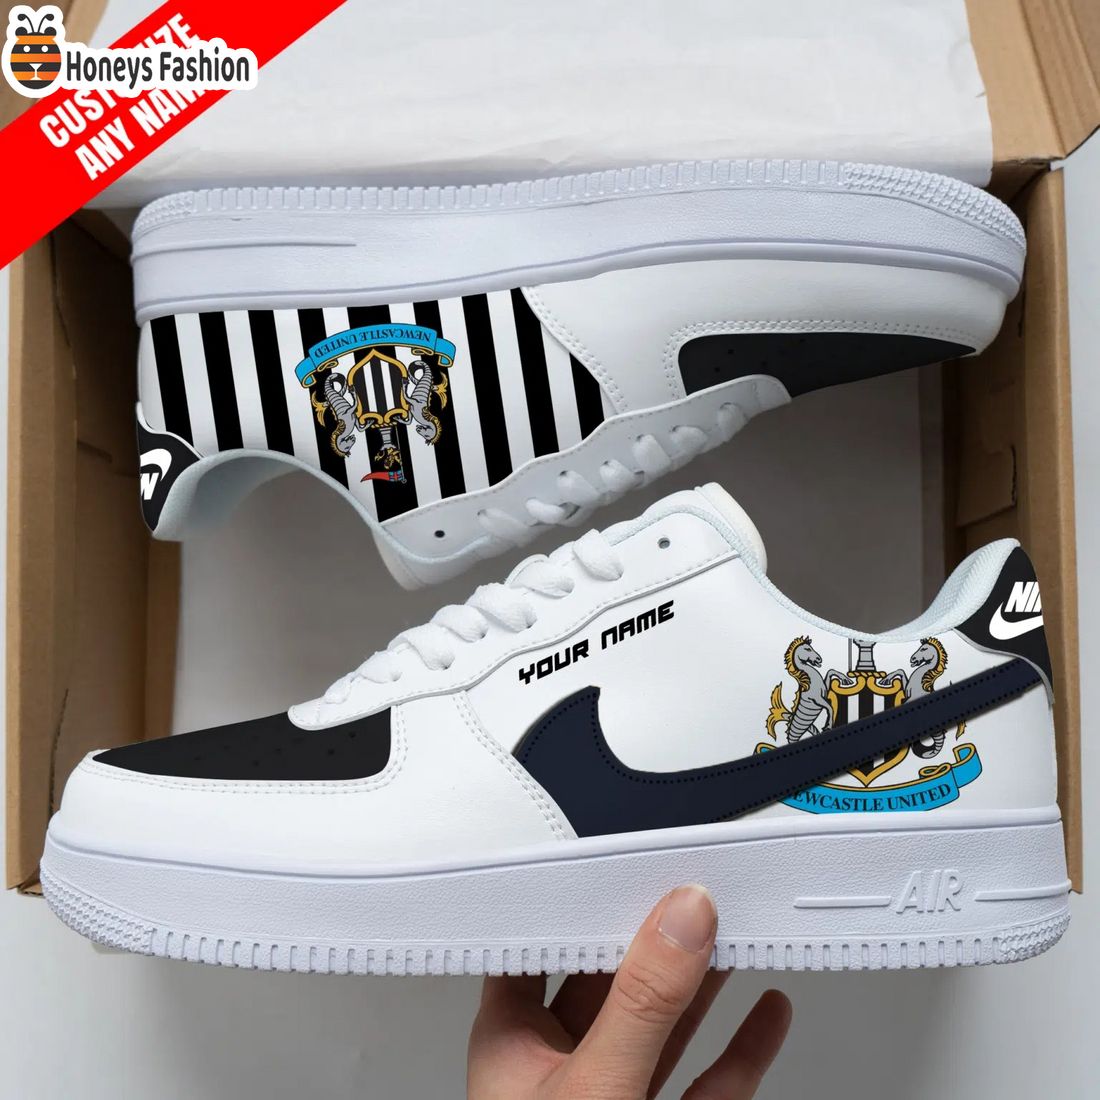 Newcastle United Personalized Nike Air Force Sneakers